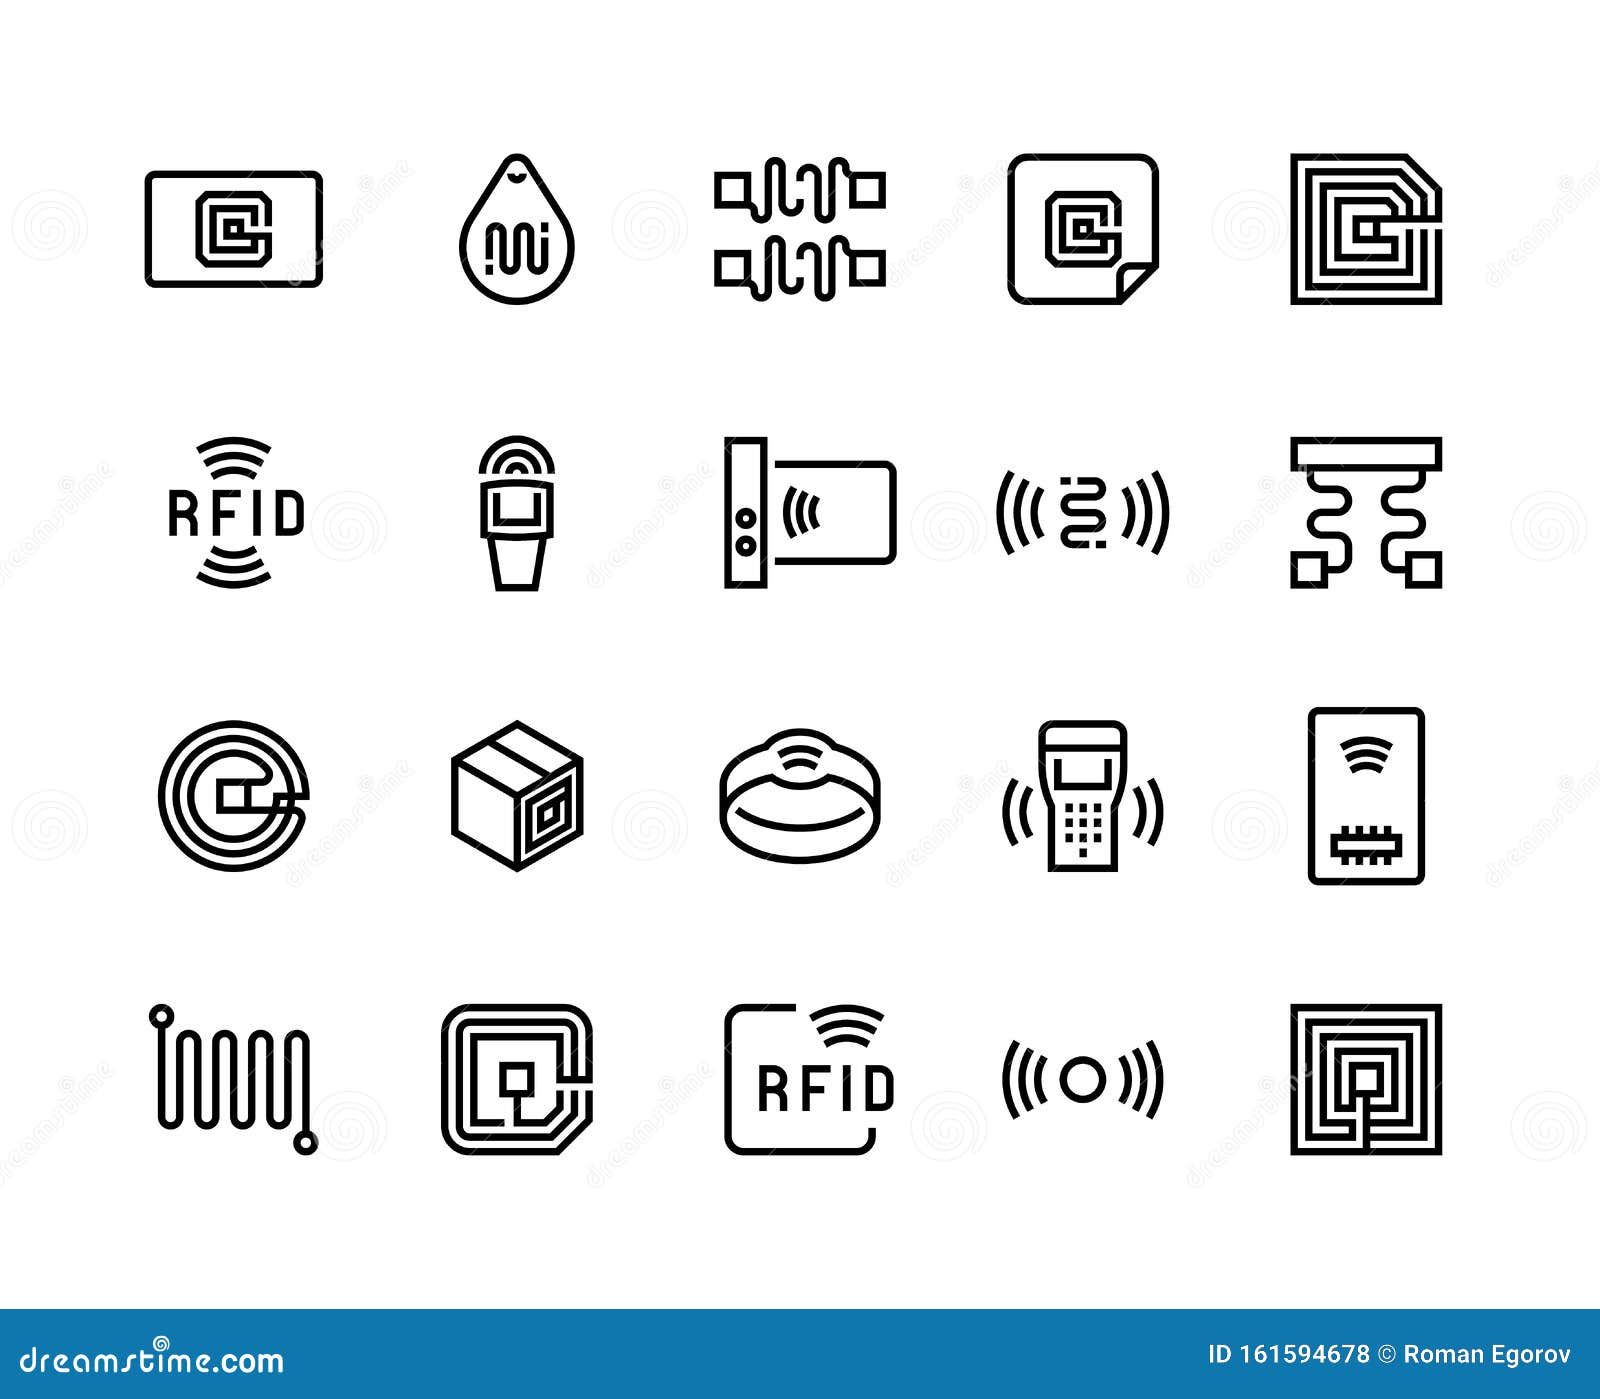 Radio Tag Line Icons. Wireless RFID Chip and Radio-frequency Identification, Wireless and Electric Circuit Stock Vector - Illustration of graphic, furture: 161594678